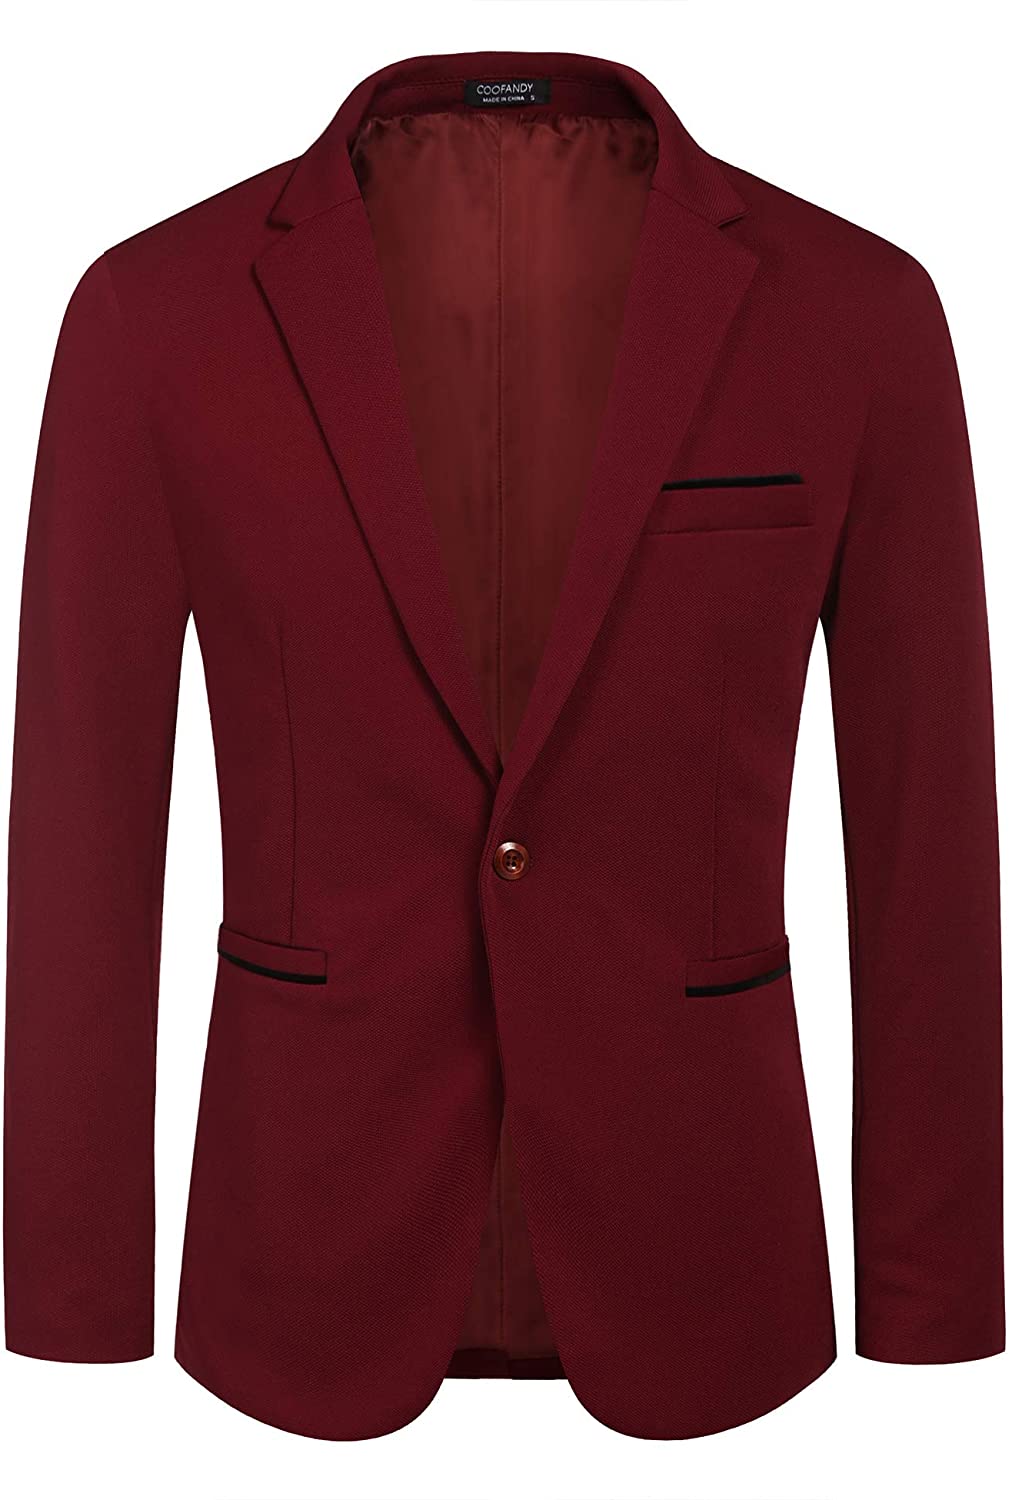 Men's Notched Lapel Wine Red One Button Sports Coat Blazer